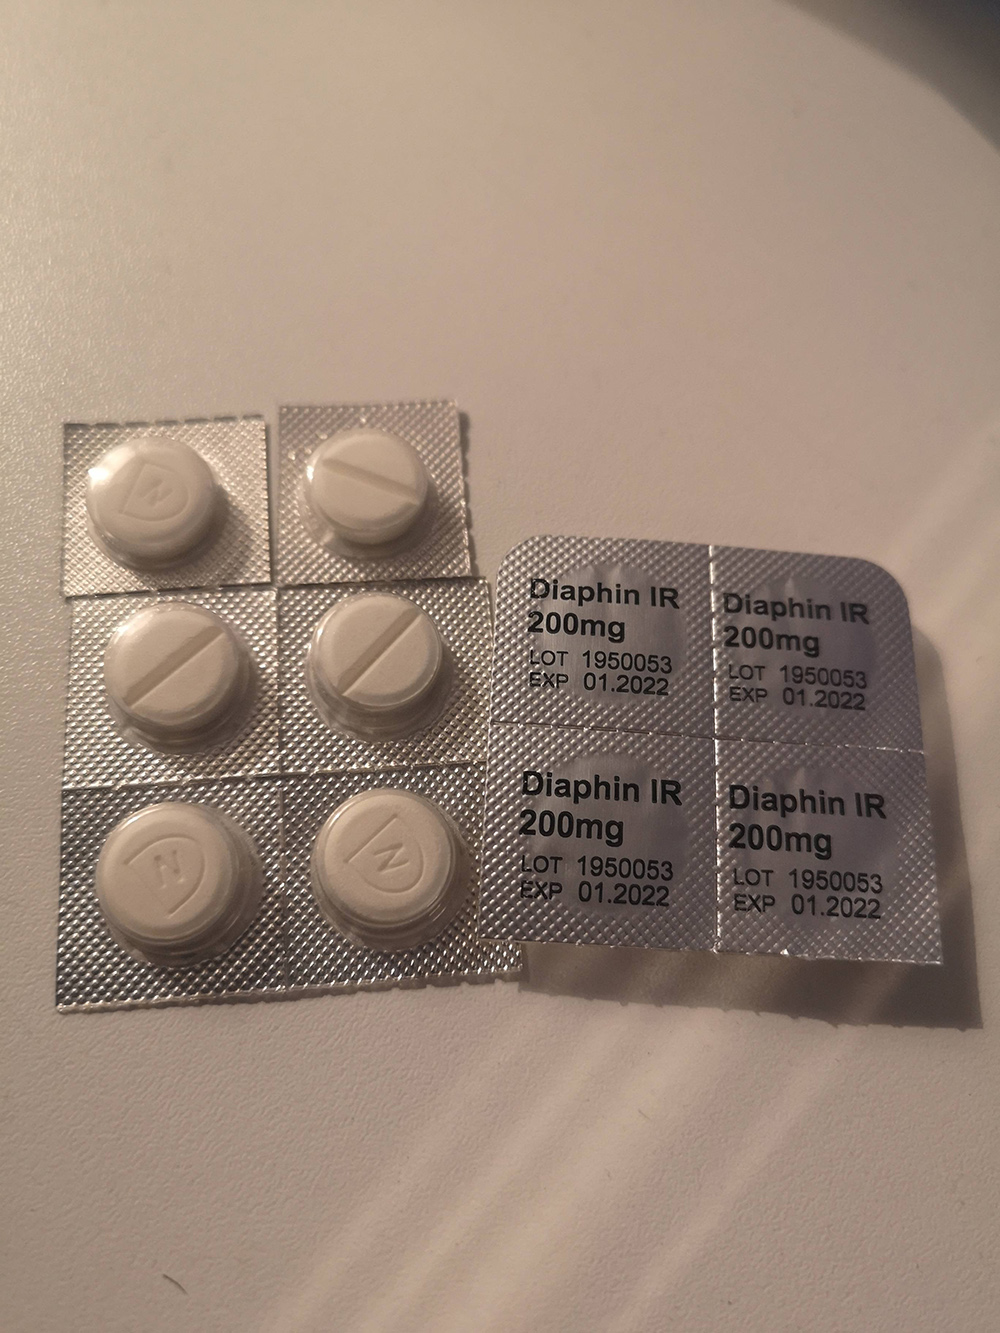 Diaphin 200mg for Sale – Pharmaceutical Heroin – 100% Diacetylmorphine